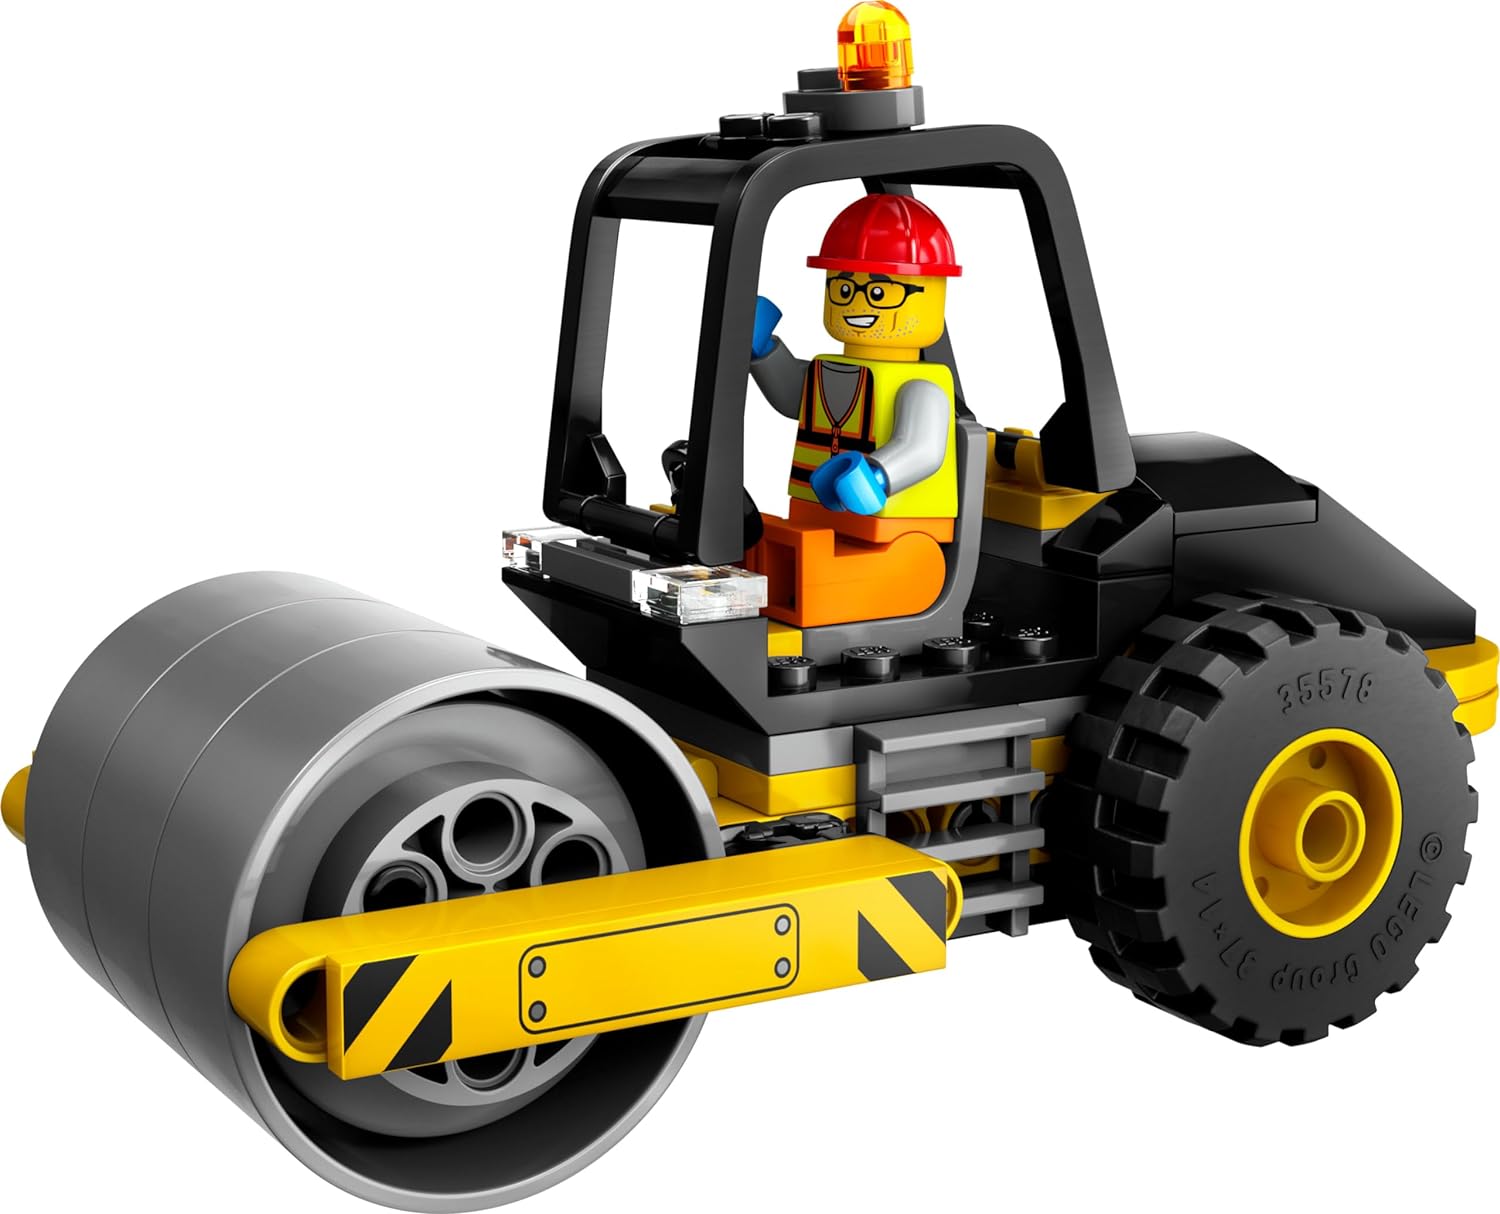 LEGO City Construction Steamroller Toy Building Kit for Ages 5+